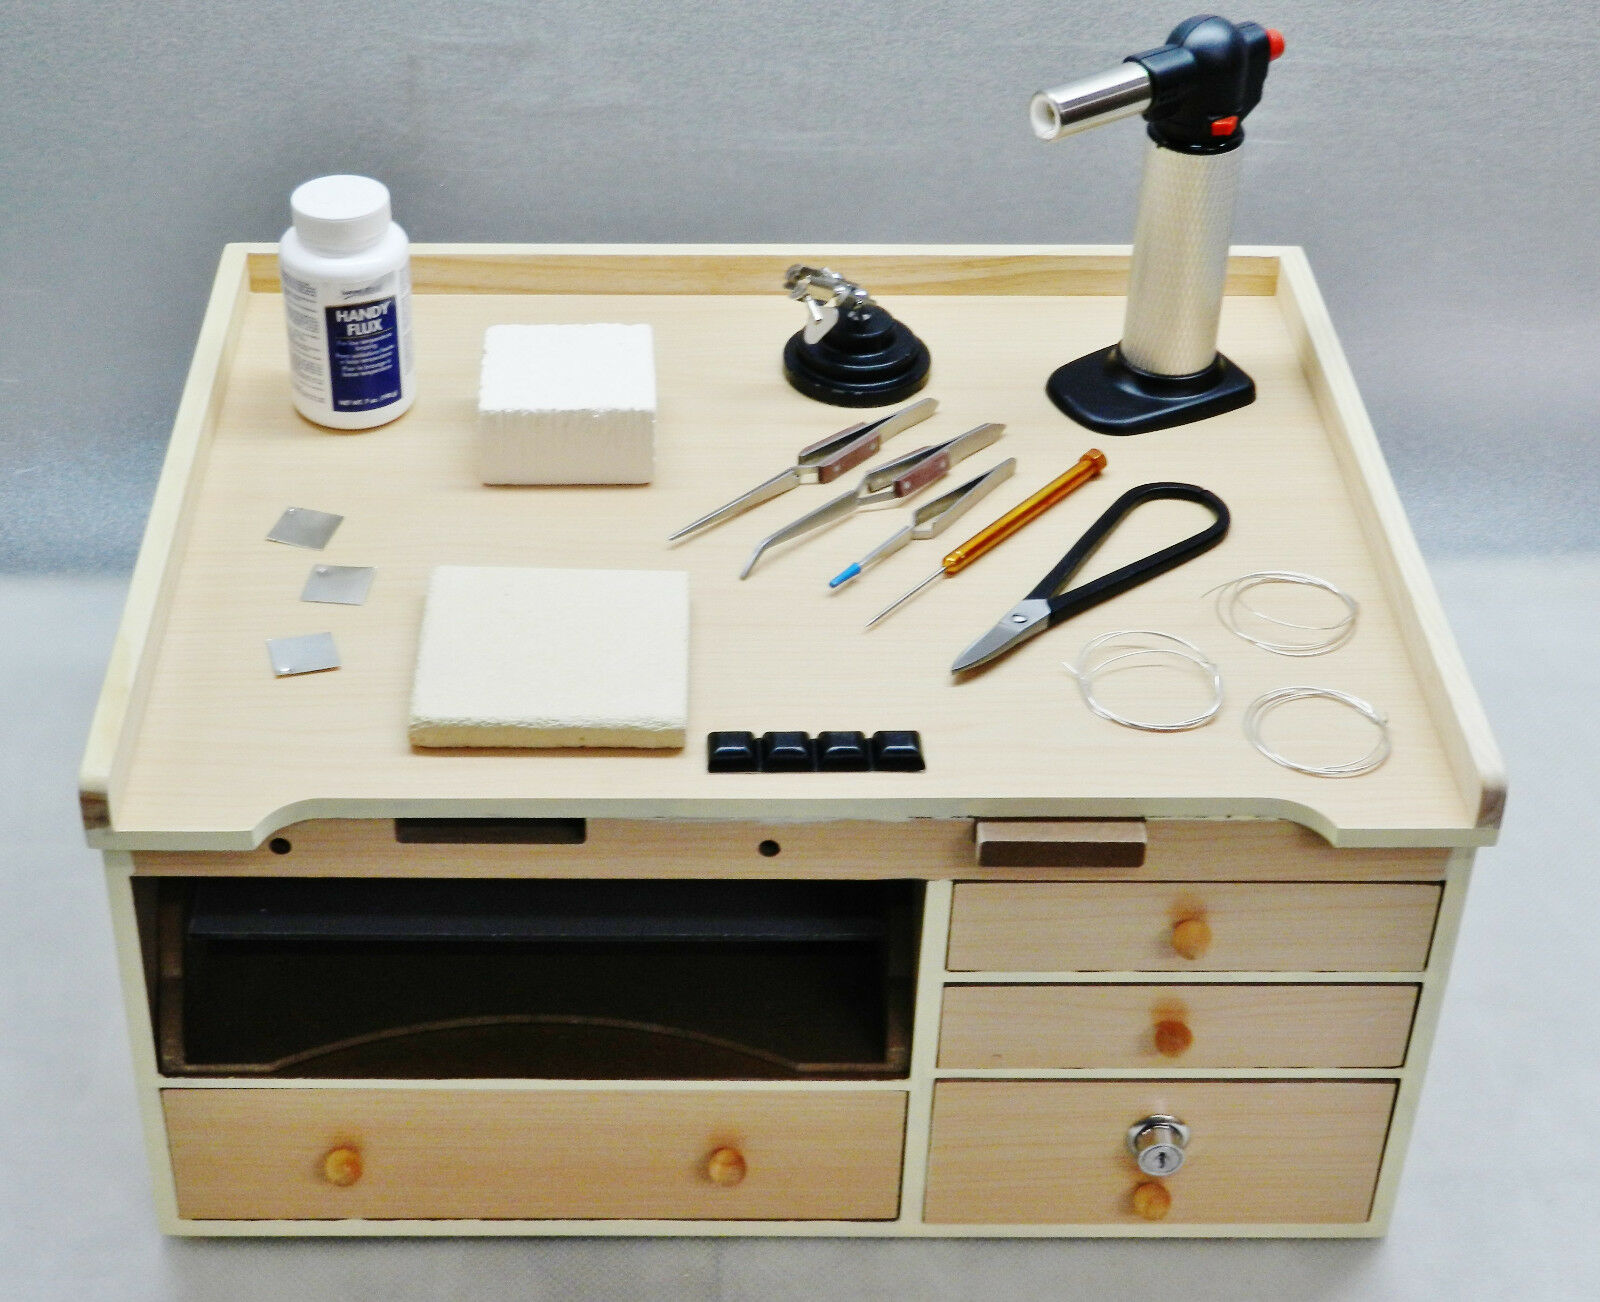 Workbench & Jewelry Soldering Tools Supplies Make Jewelry Solder & Repair  Bench by JTS